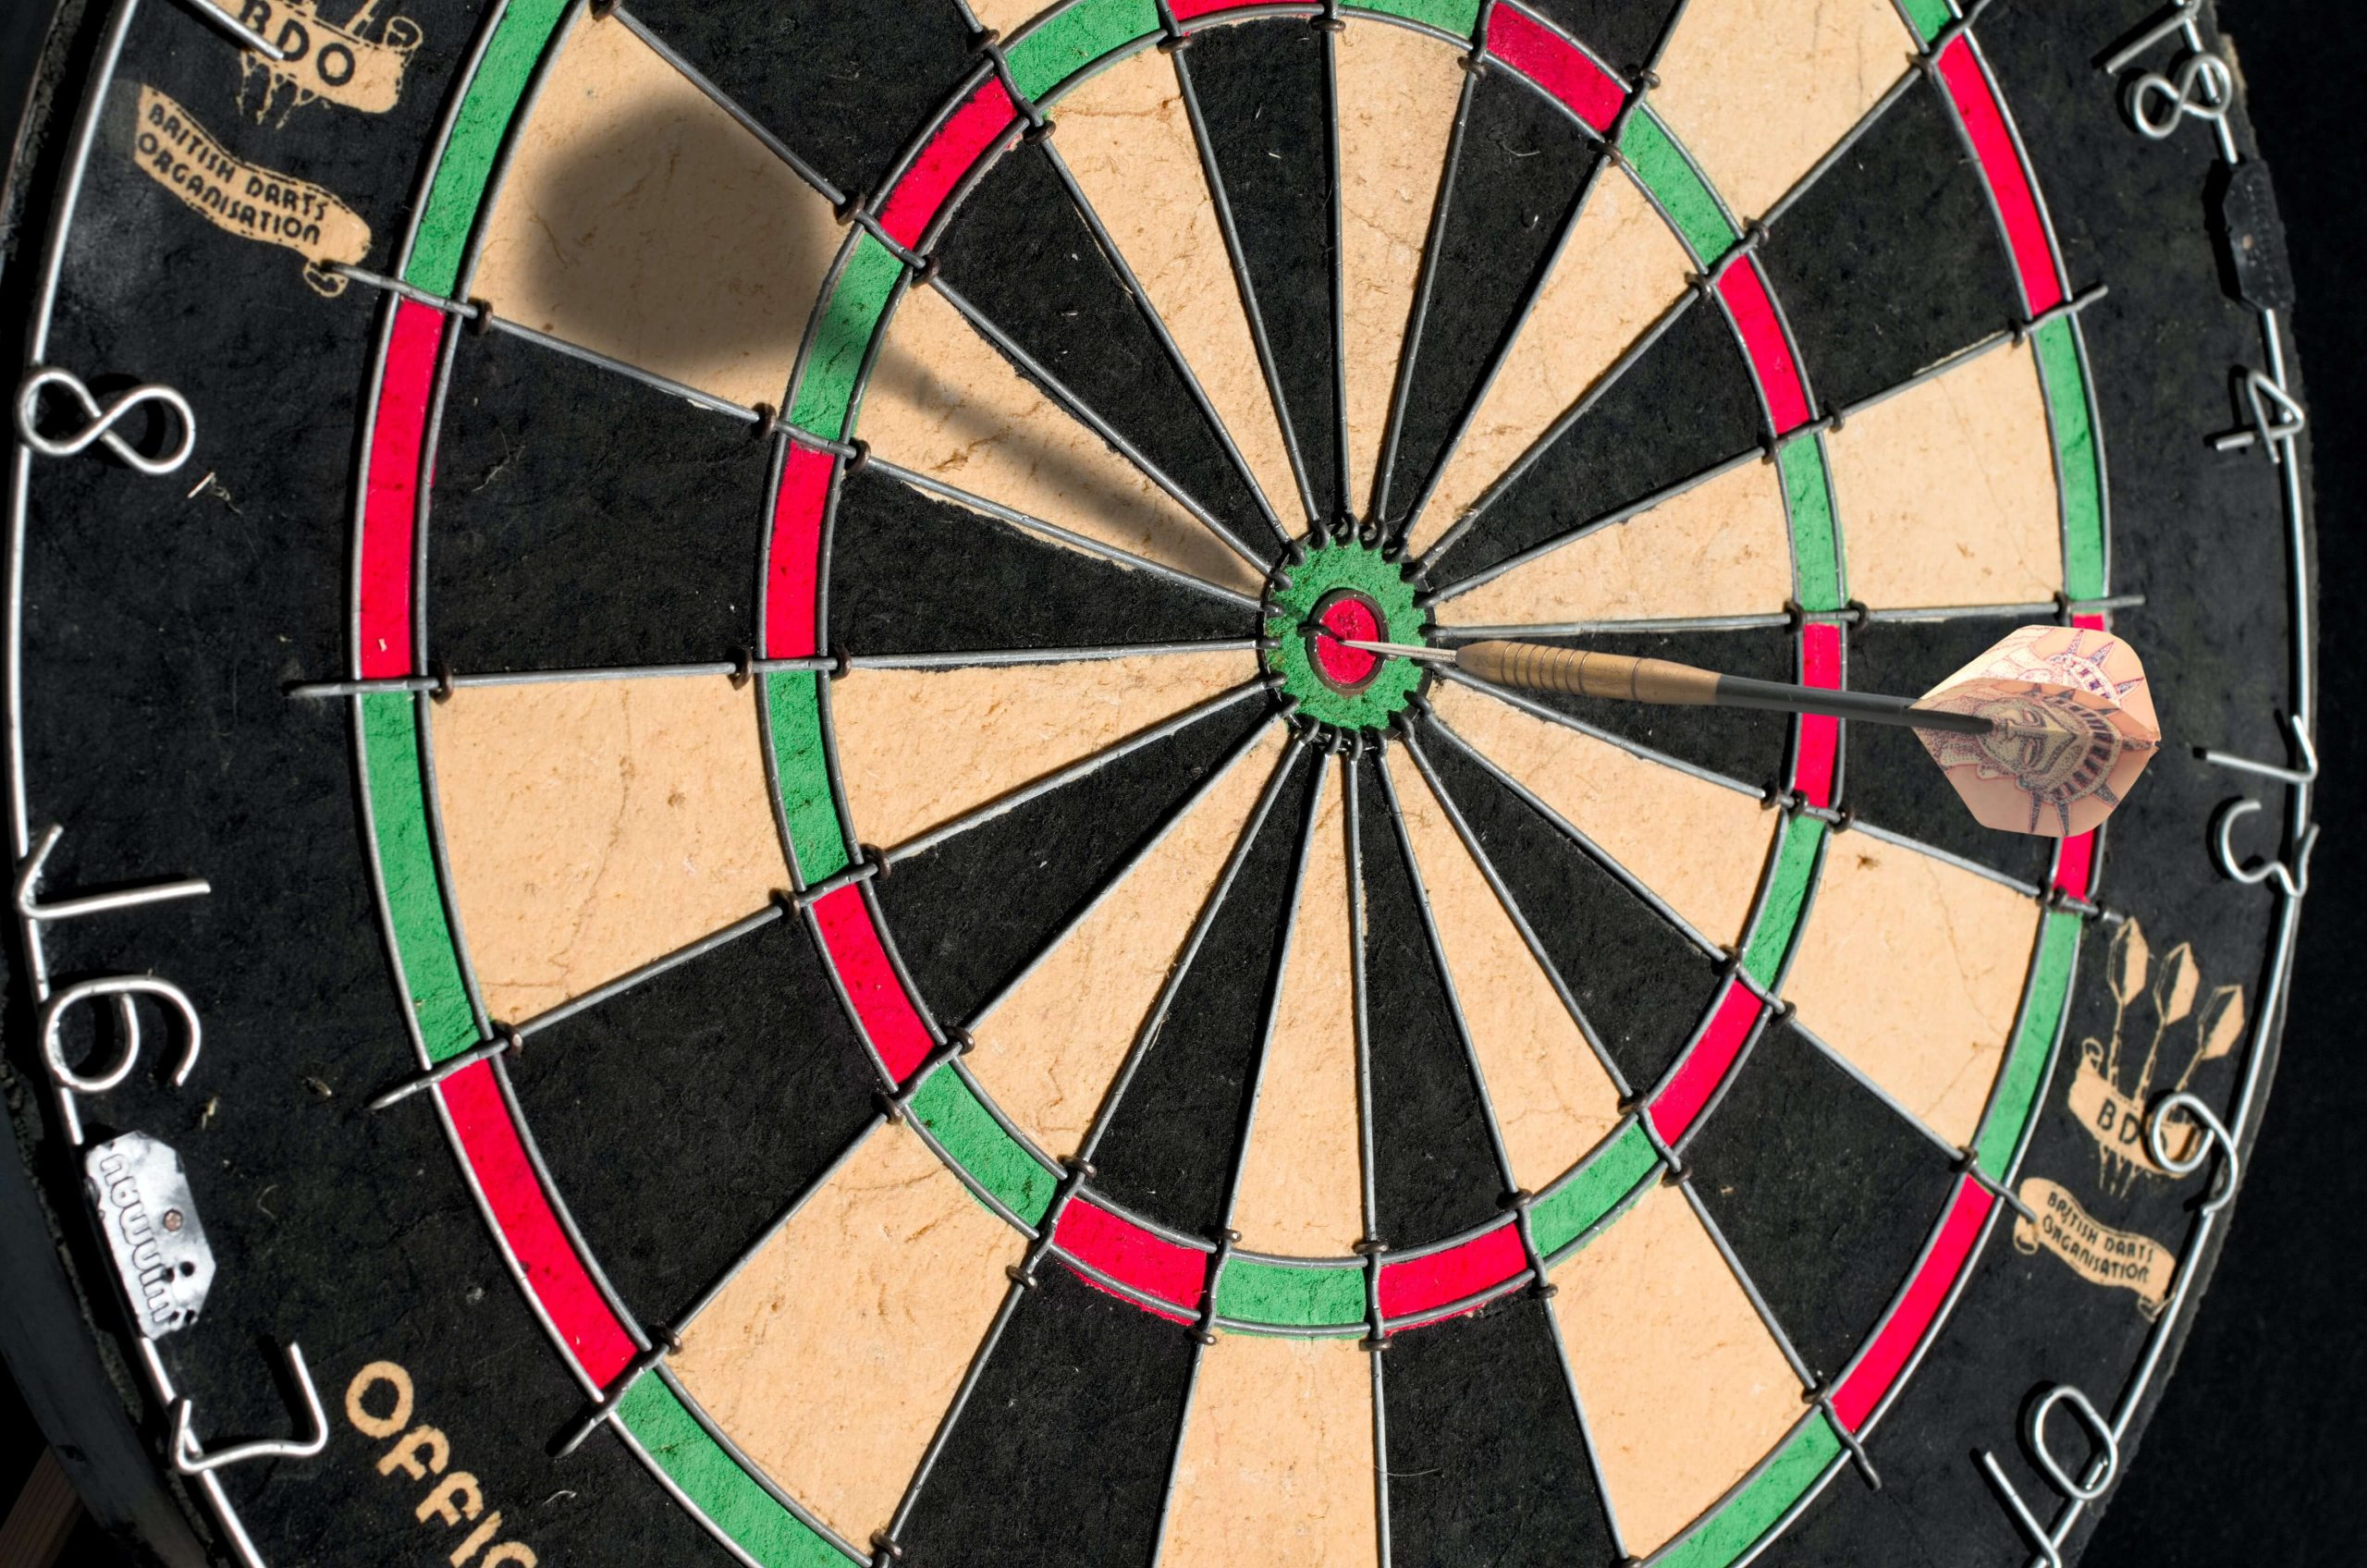 The center target on the dart board.